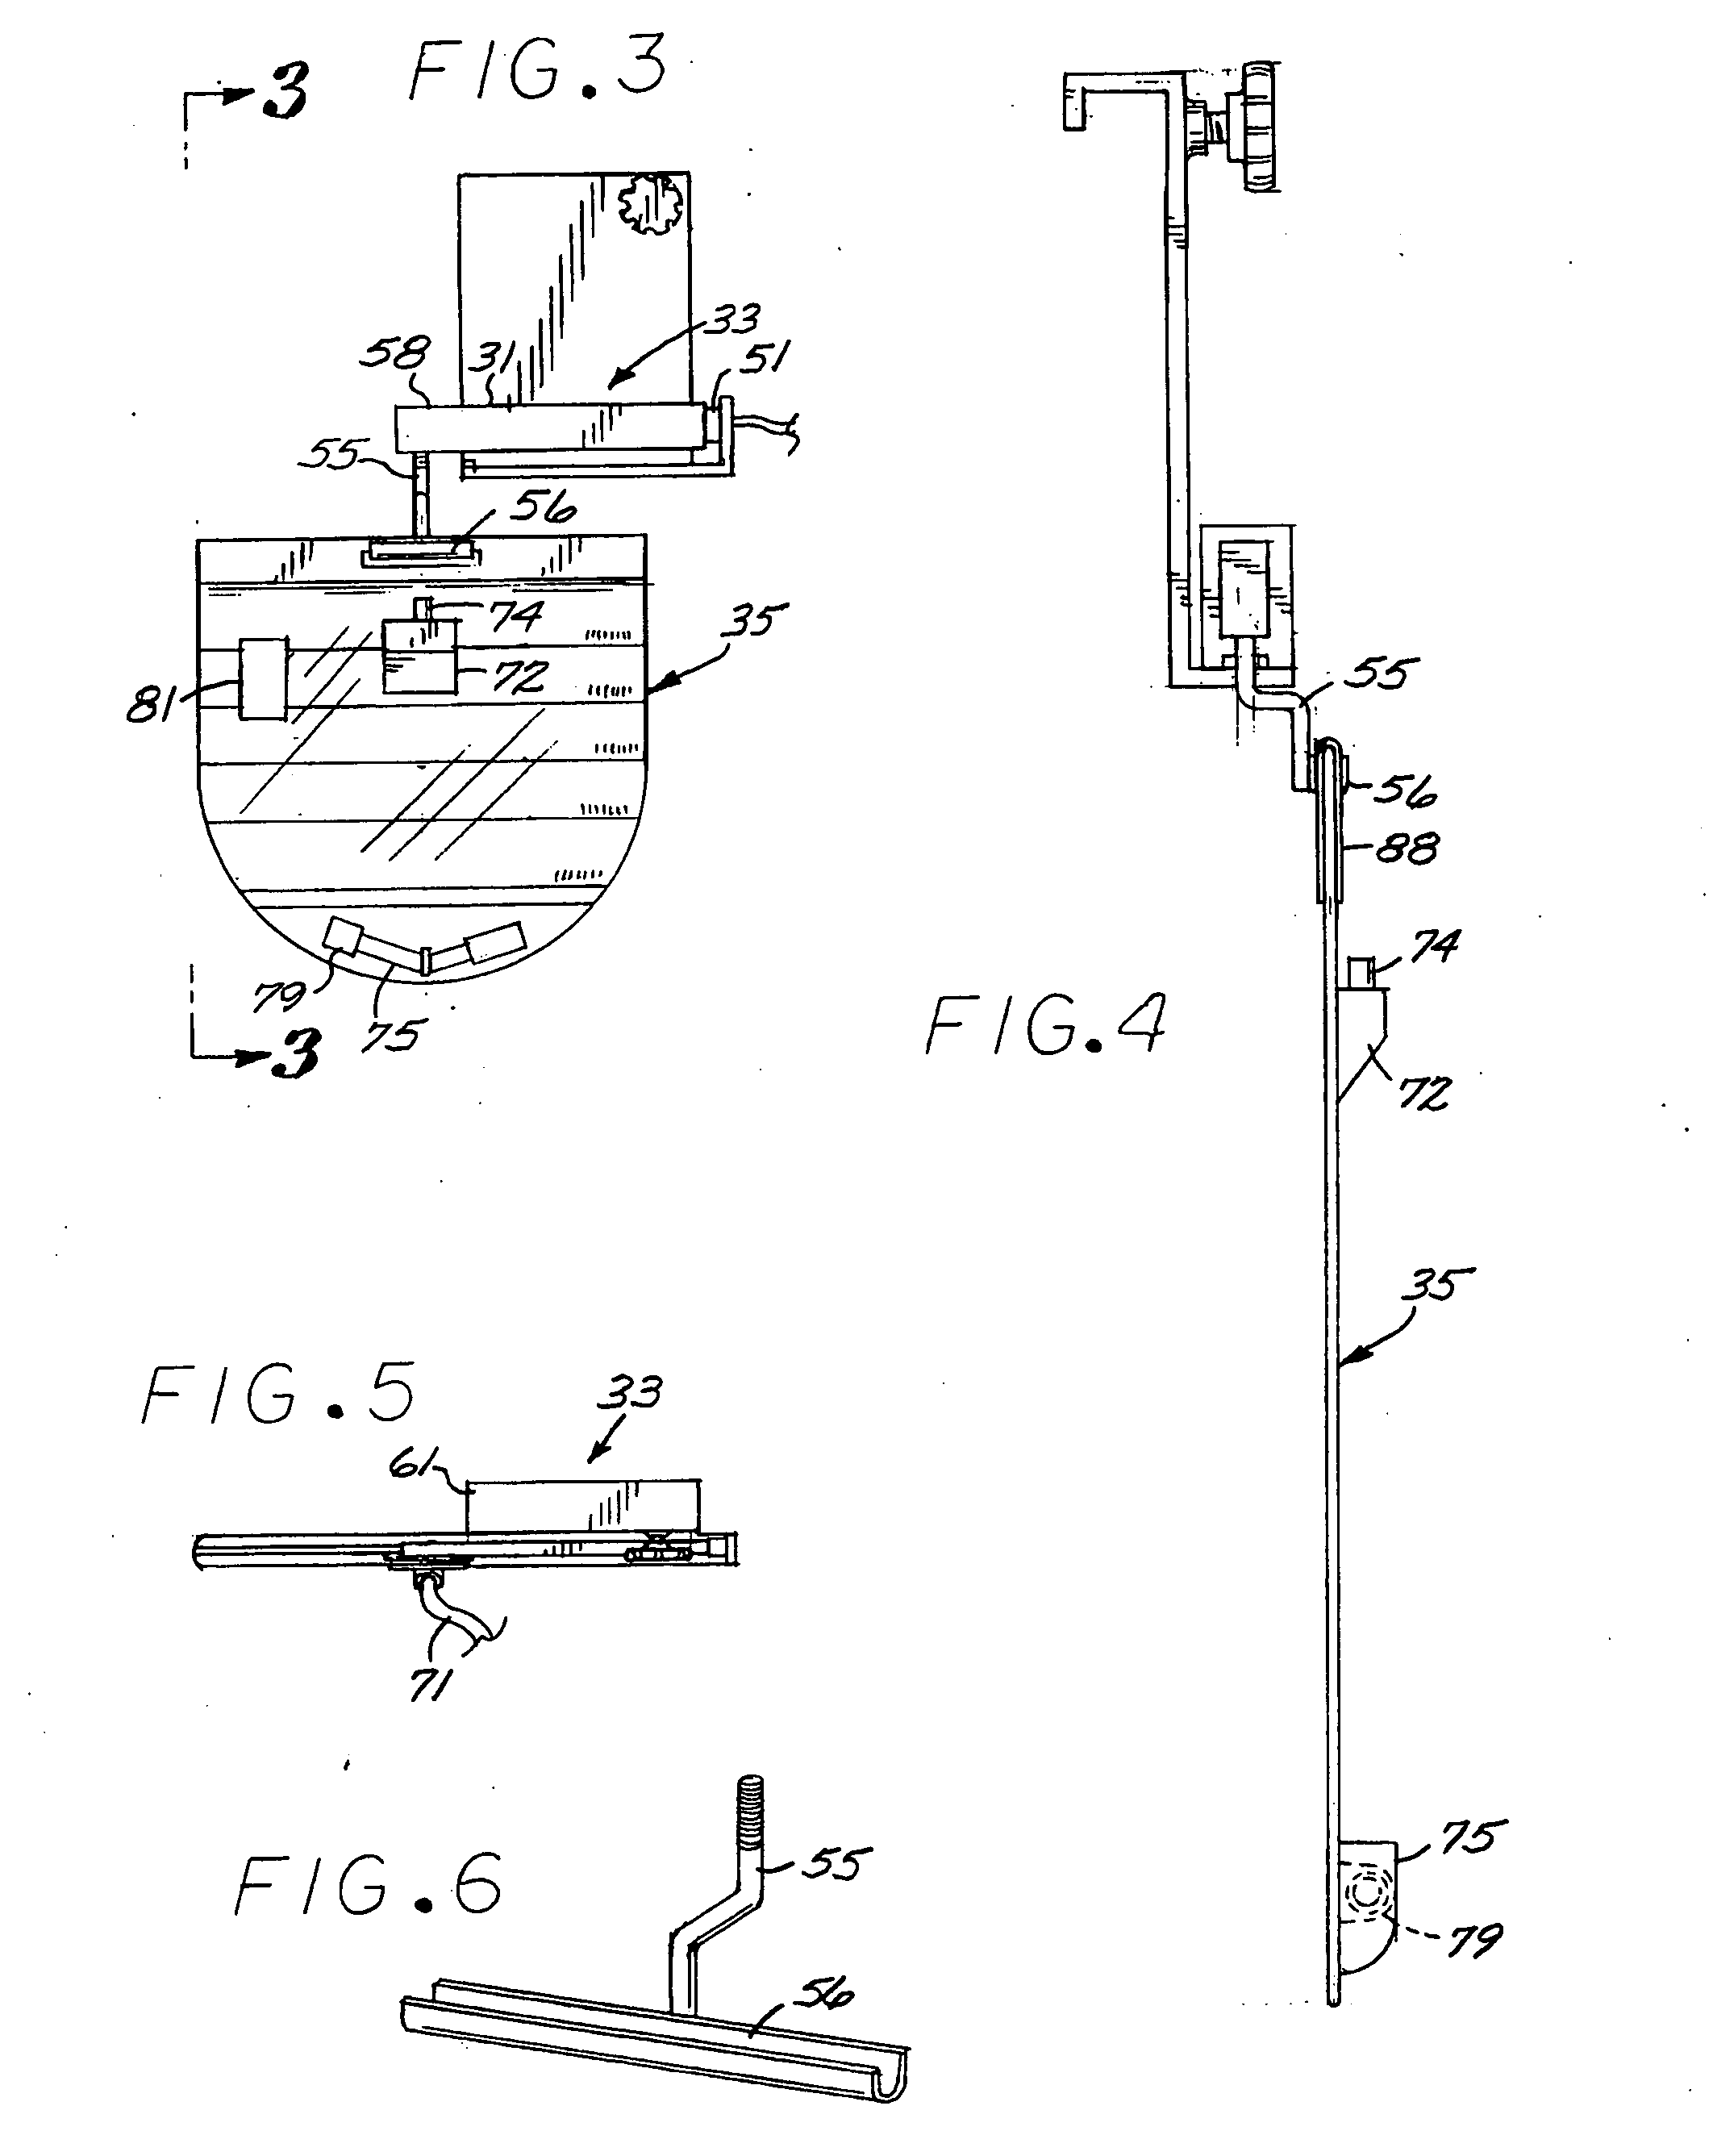 Apparatus for collecting and calculating quantity of patient fluid loss and method of using same